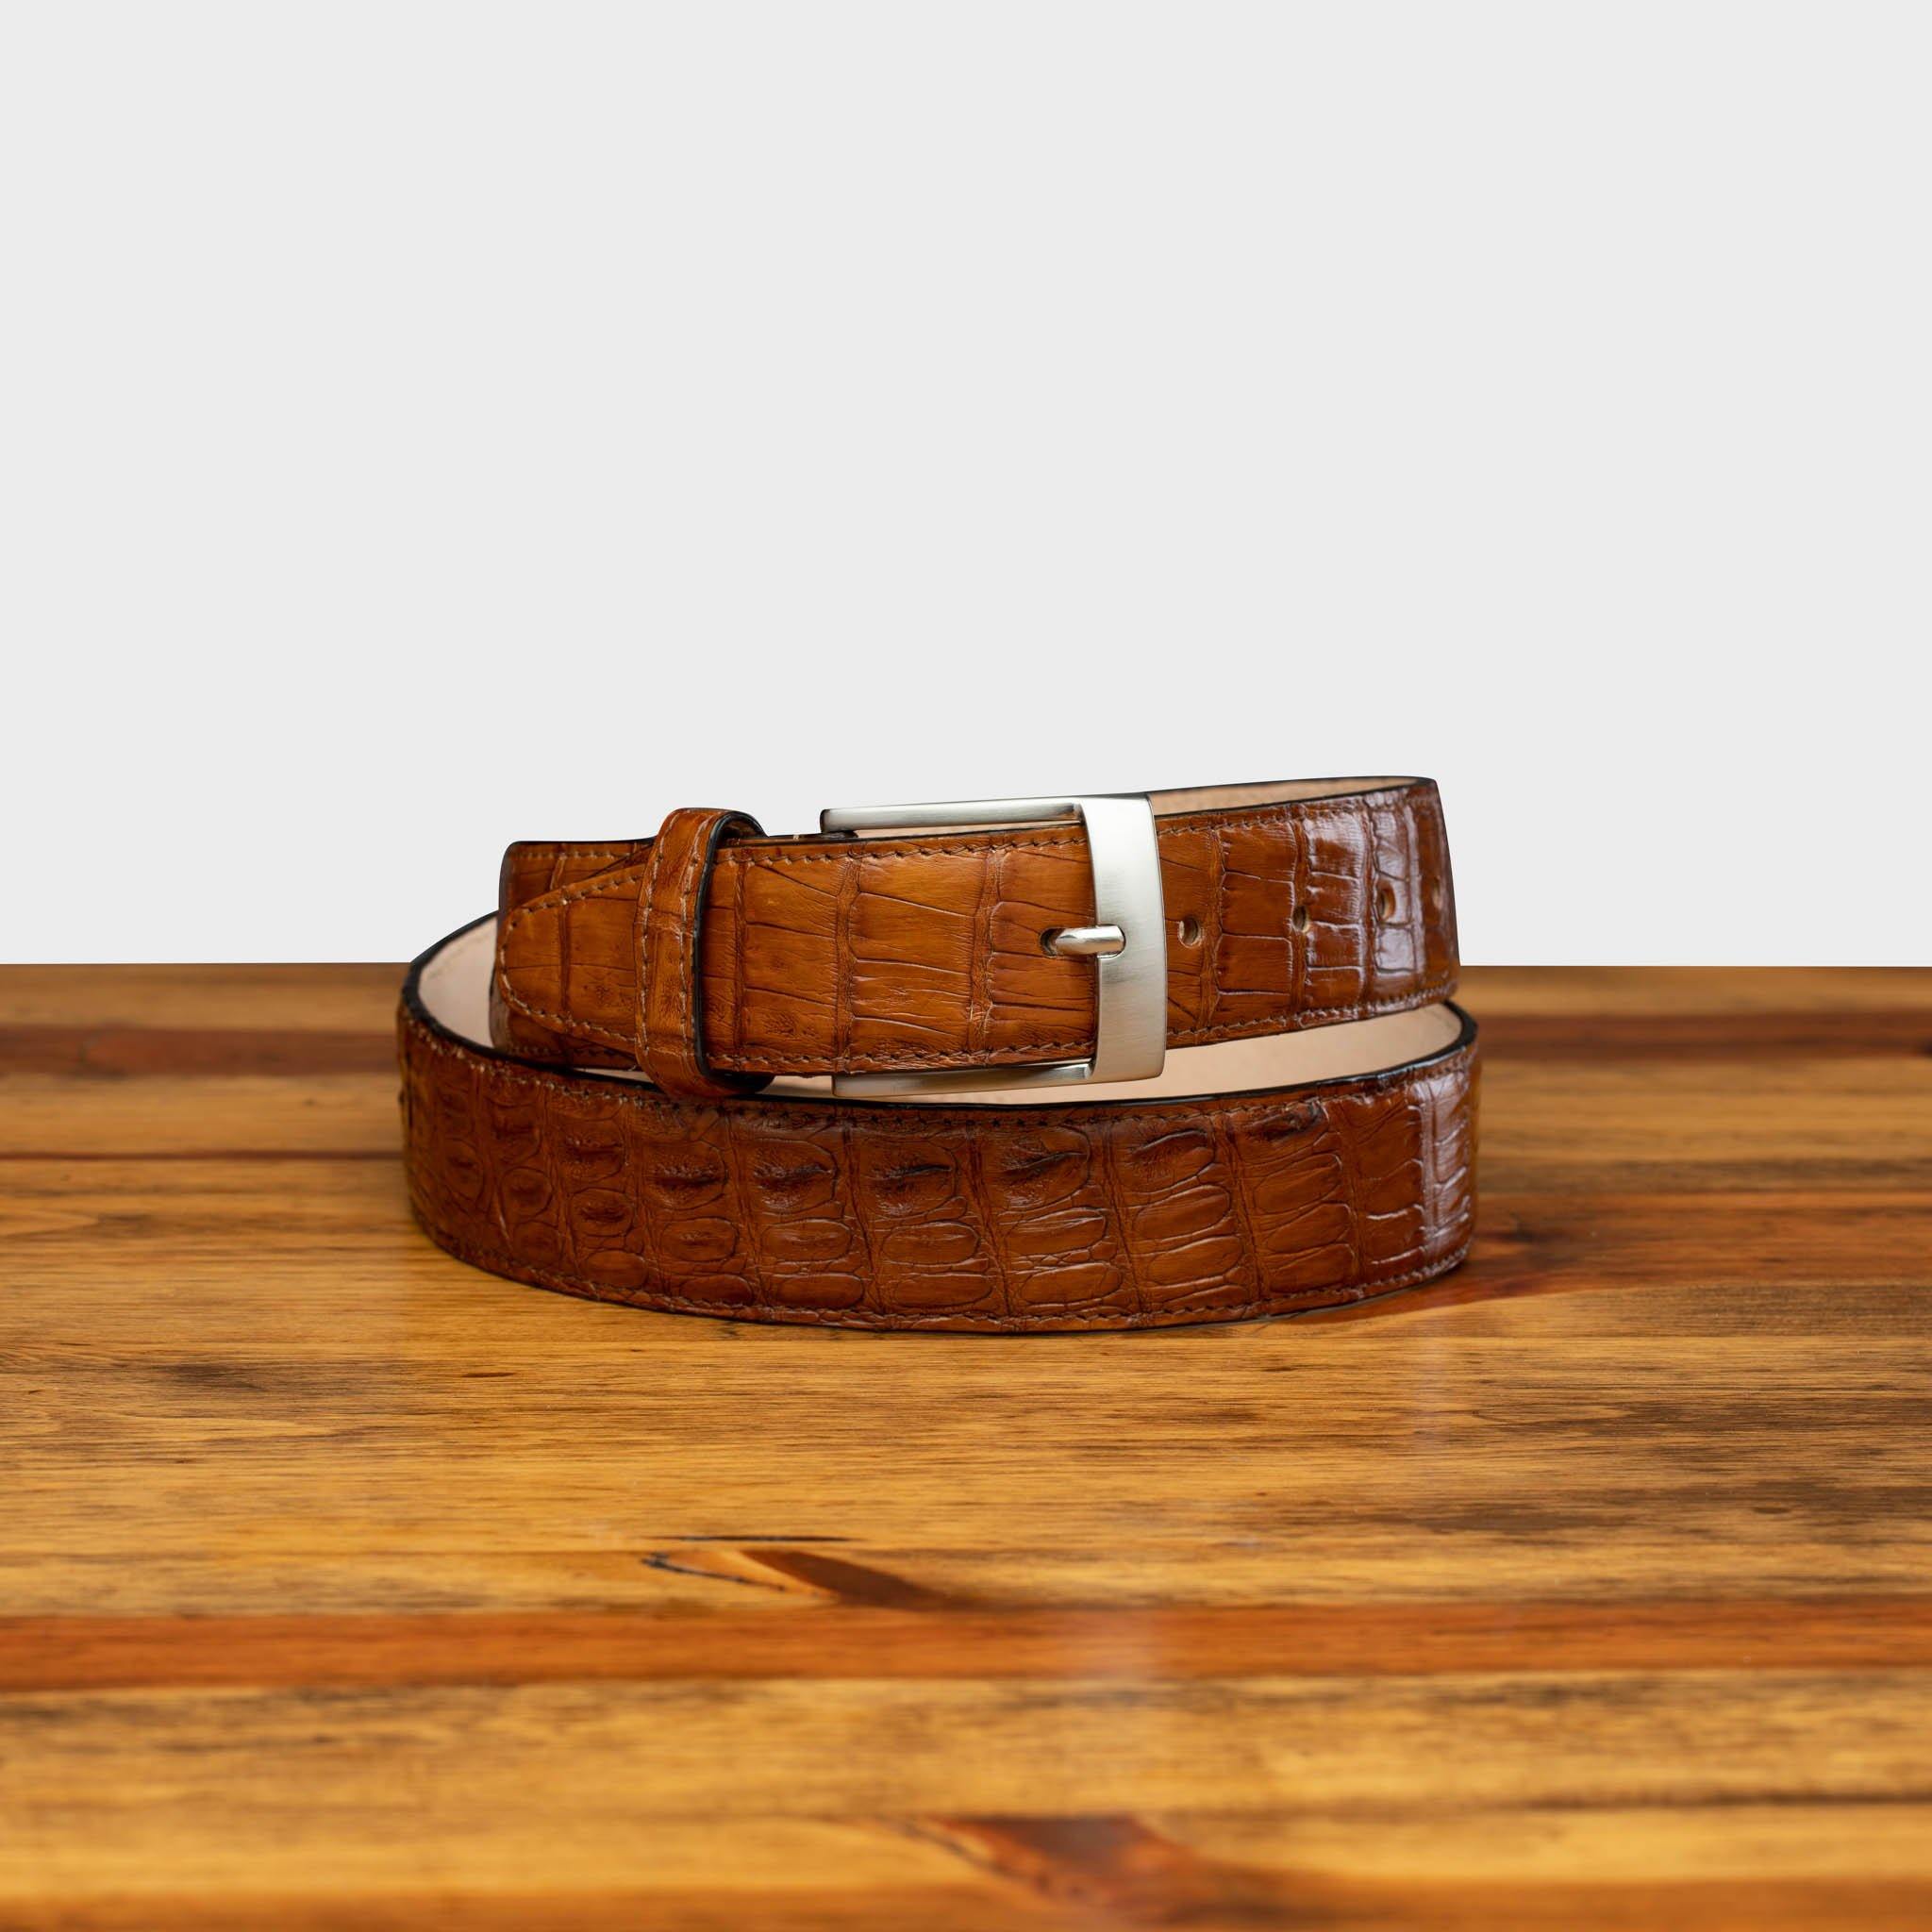 Front profile of C7981 Calzoleria Toscana Brick Exotic Hornback Belt curled up on top of a wooden table